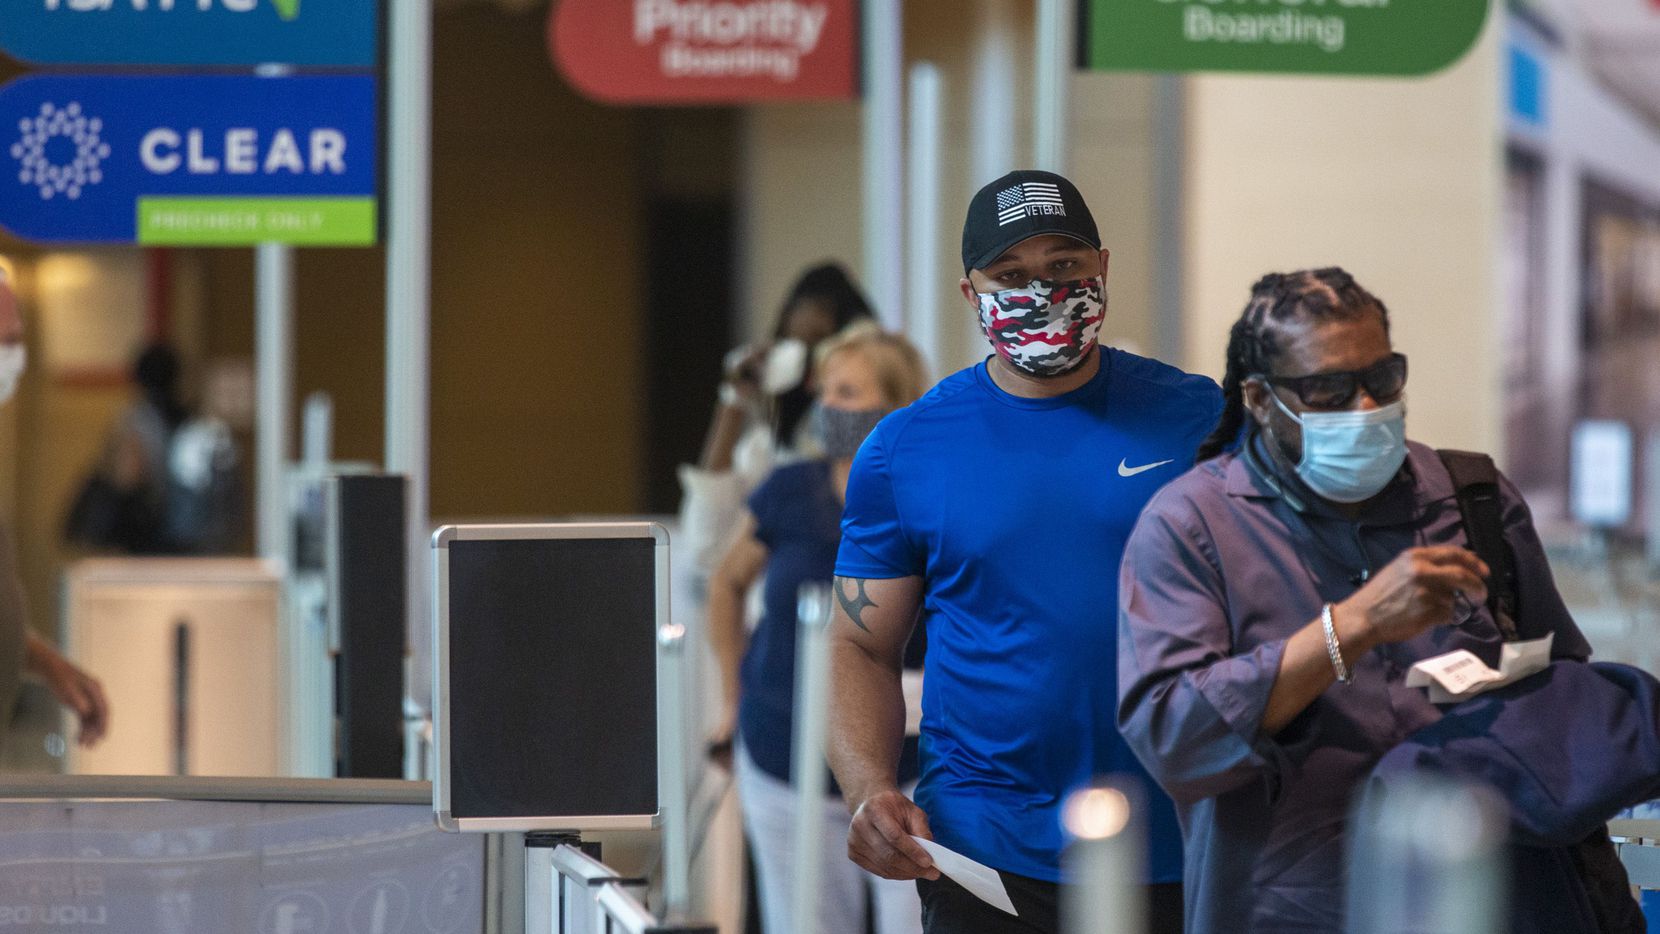 Masked passengers walk to the security checkpoint at Dallas Love Field airport in Dallas on a recent morning.